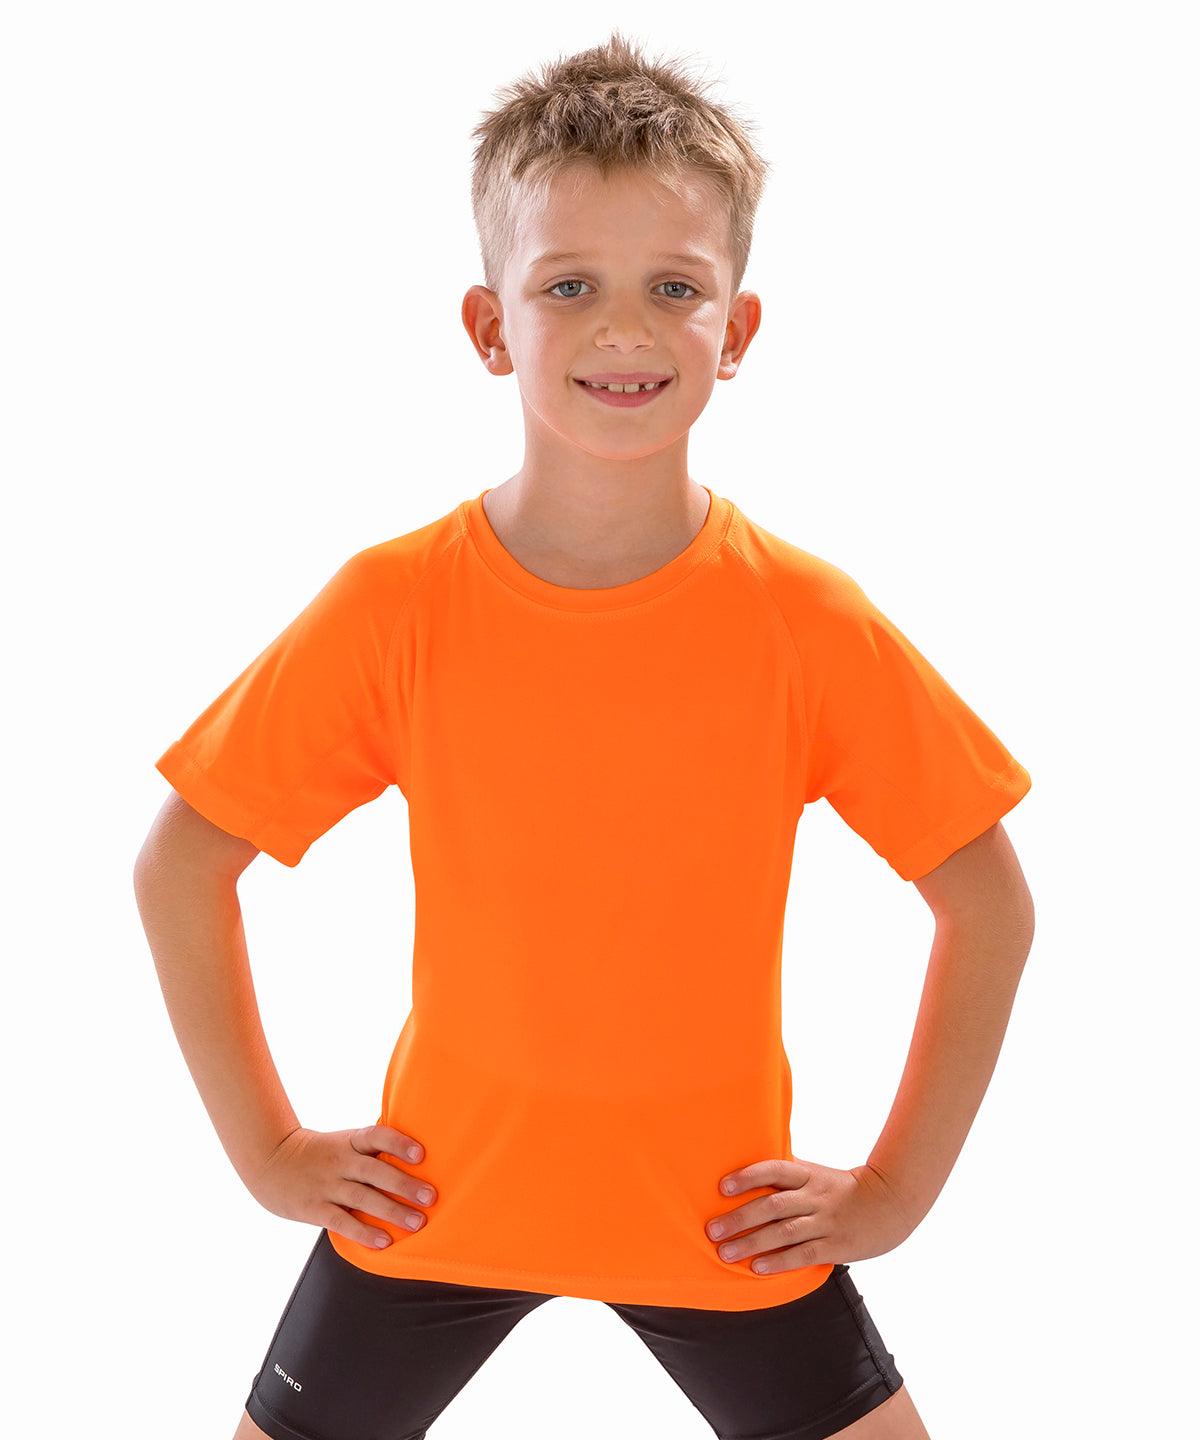 Bottle Green - Junior performance aircool tee T-Shirts Spiro Activewear & Performance, Athleisurewear, Rebrandable, Sports & Leisure, T-Shirts & Vests Schoolwear Centres